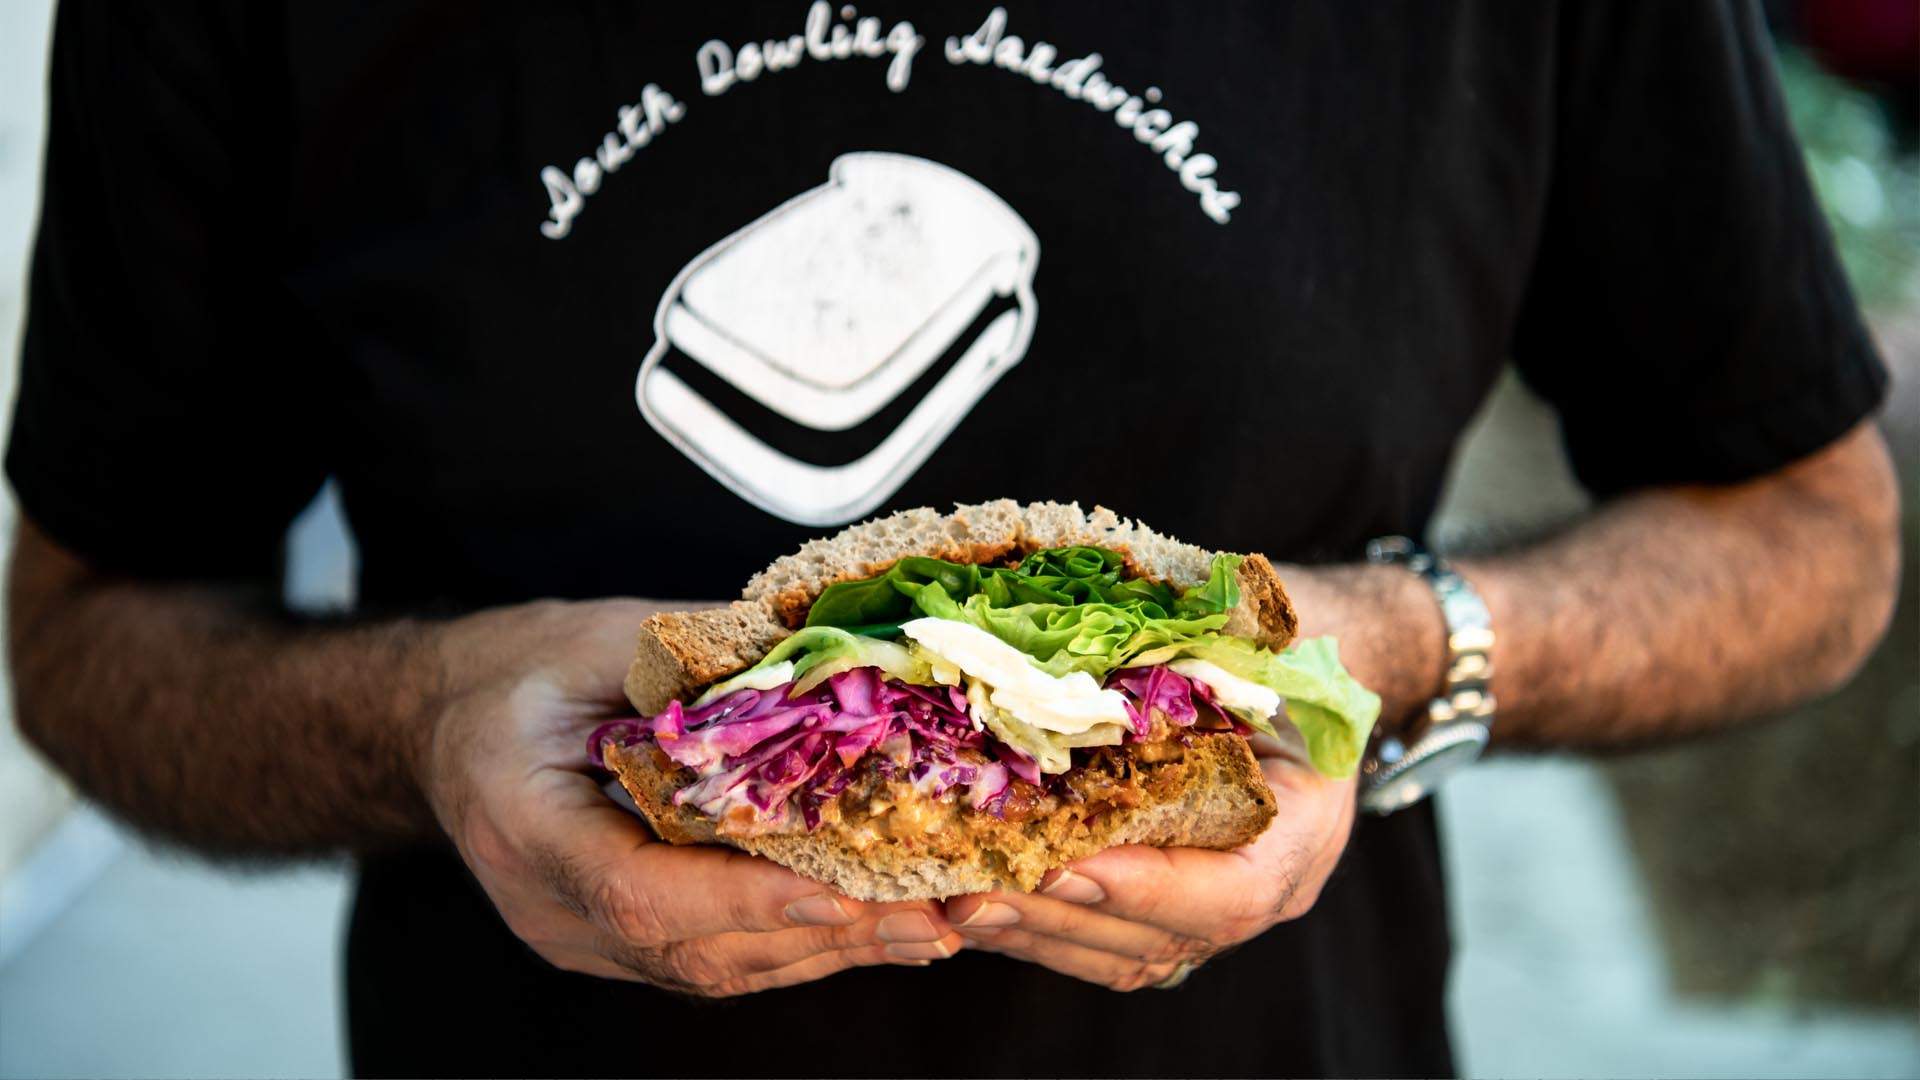 A person holding a loaded salad sandwich from South Dowling Sandwiches — one of the best sandwich shops in Sydney.